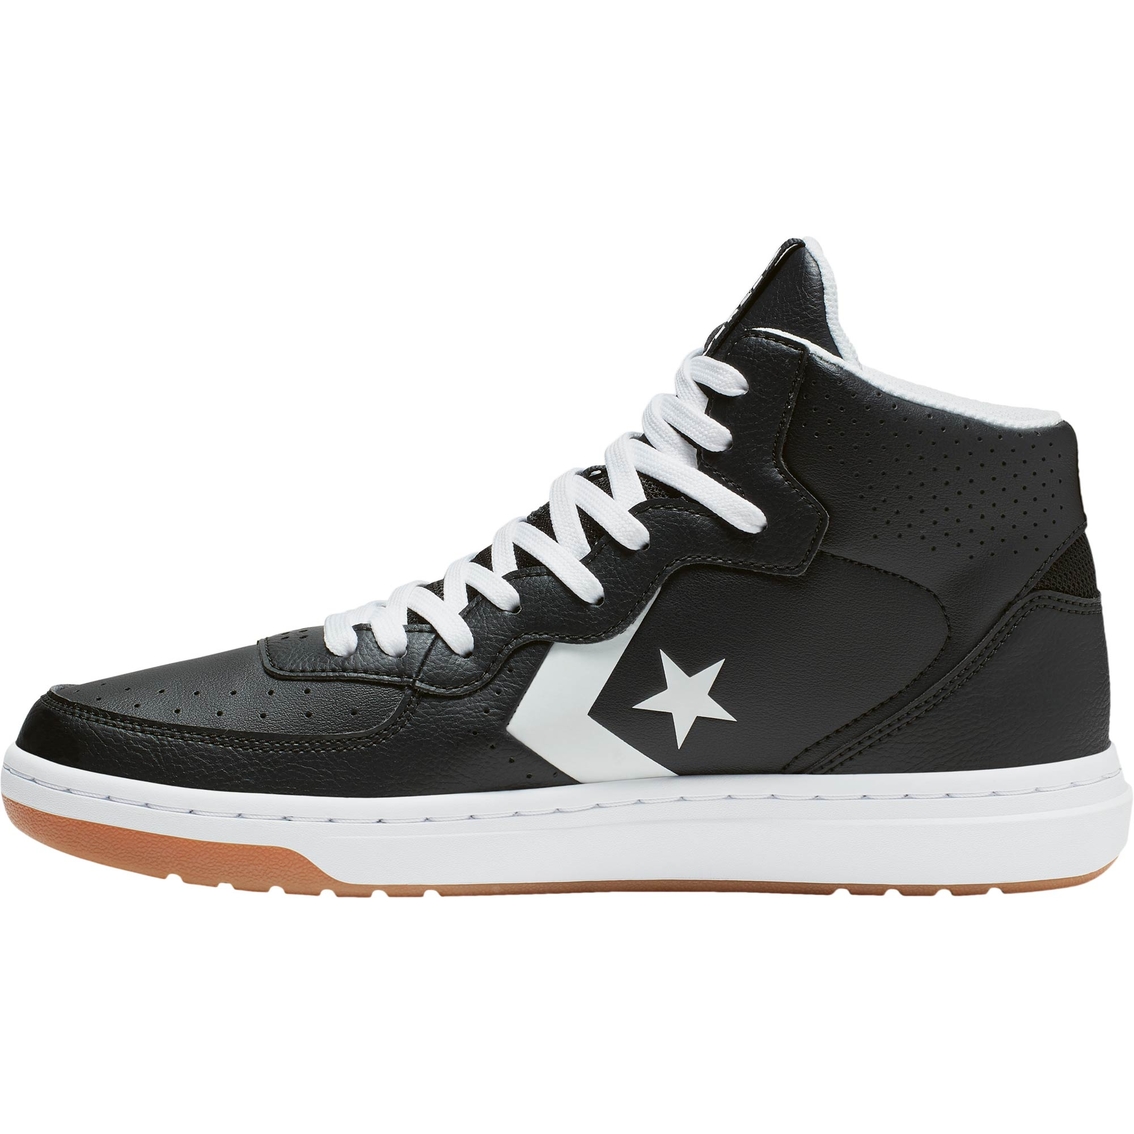 Converse Men's Rival Mid - Image 3 of 3